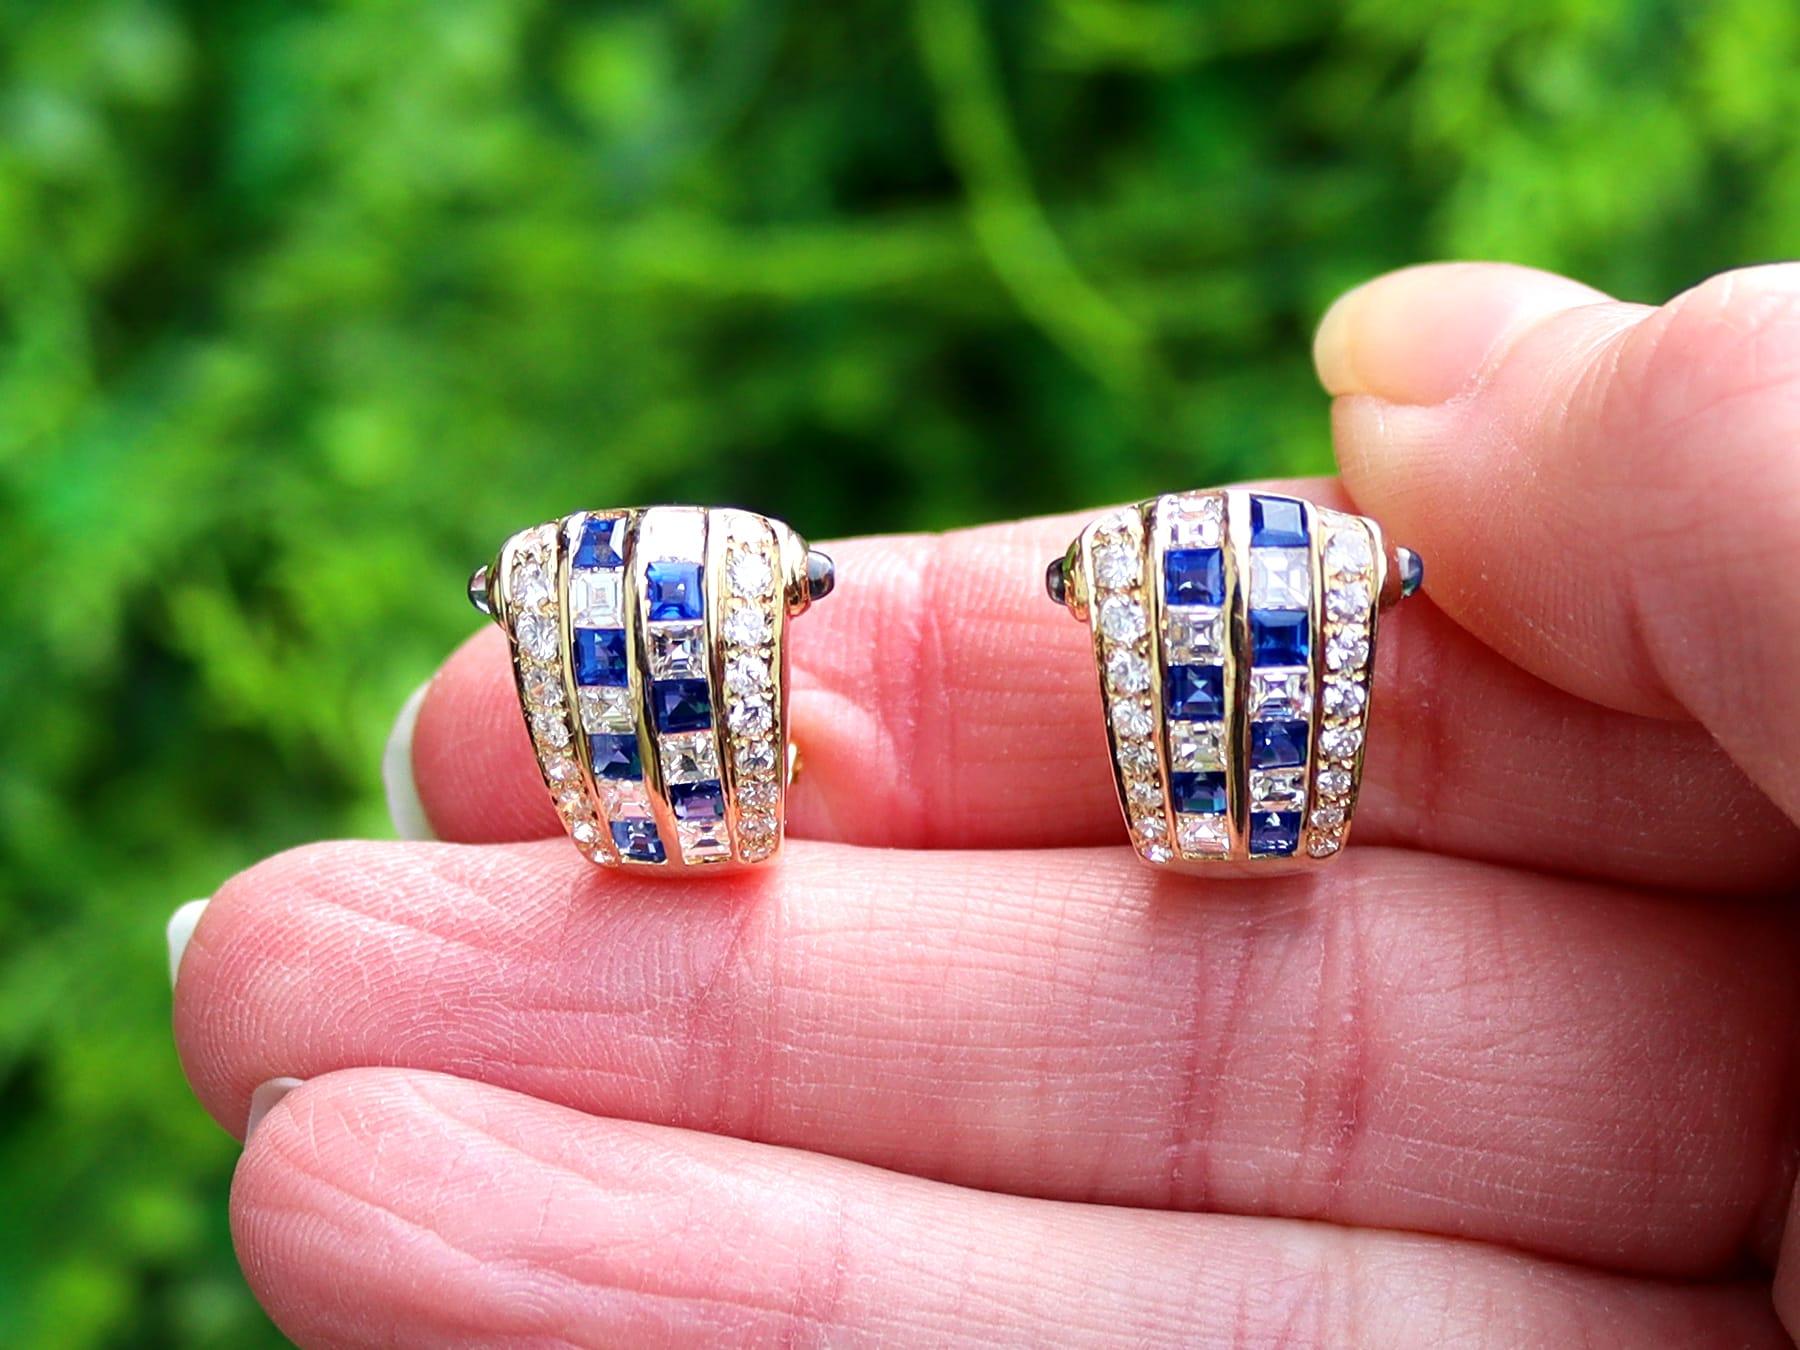 A fine and impressive pair of vintage 0.65 carat sapphire and 0.77 carat diamond, 18 karat yellow gold earrings; part of our diverse collection of vintage sapphire earrings.

These fine and impressive vintage earrings have been crafted in 18k yellow